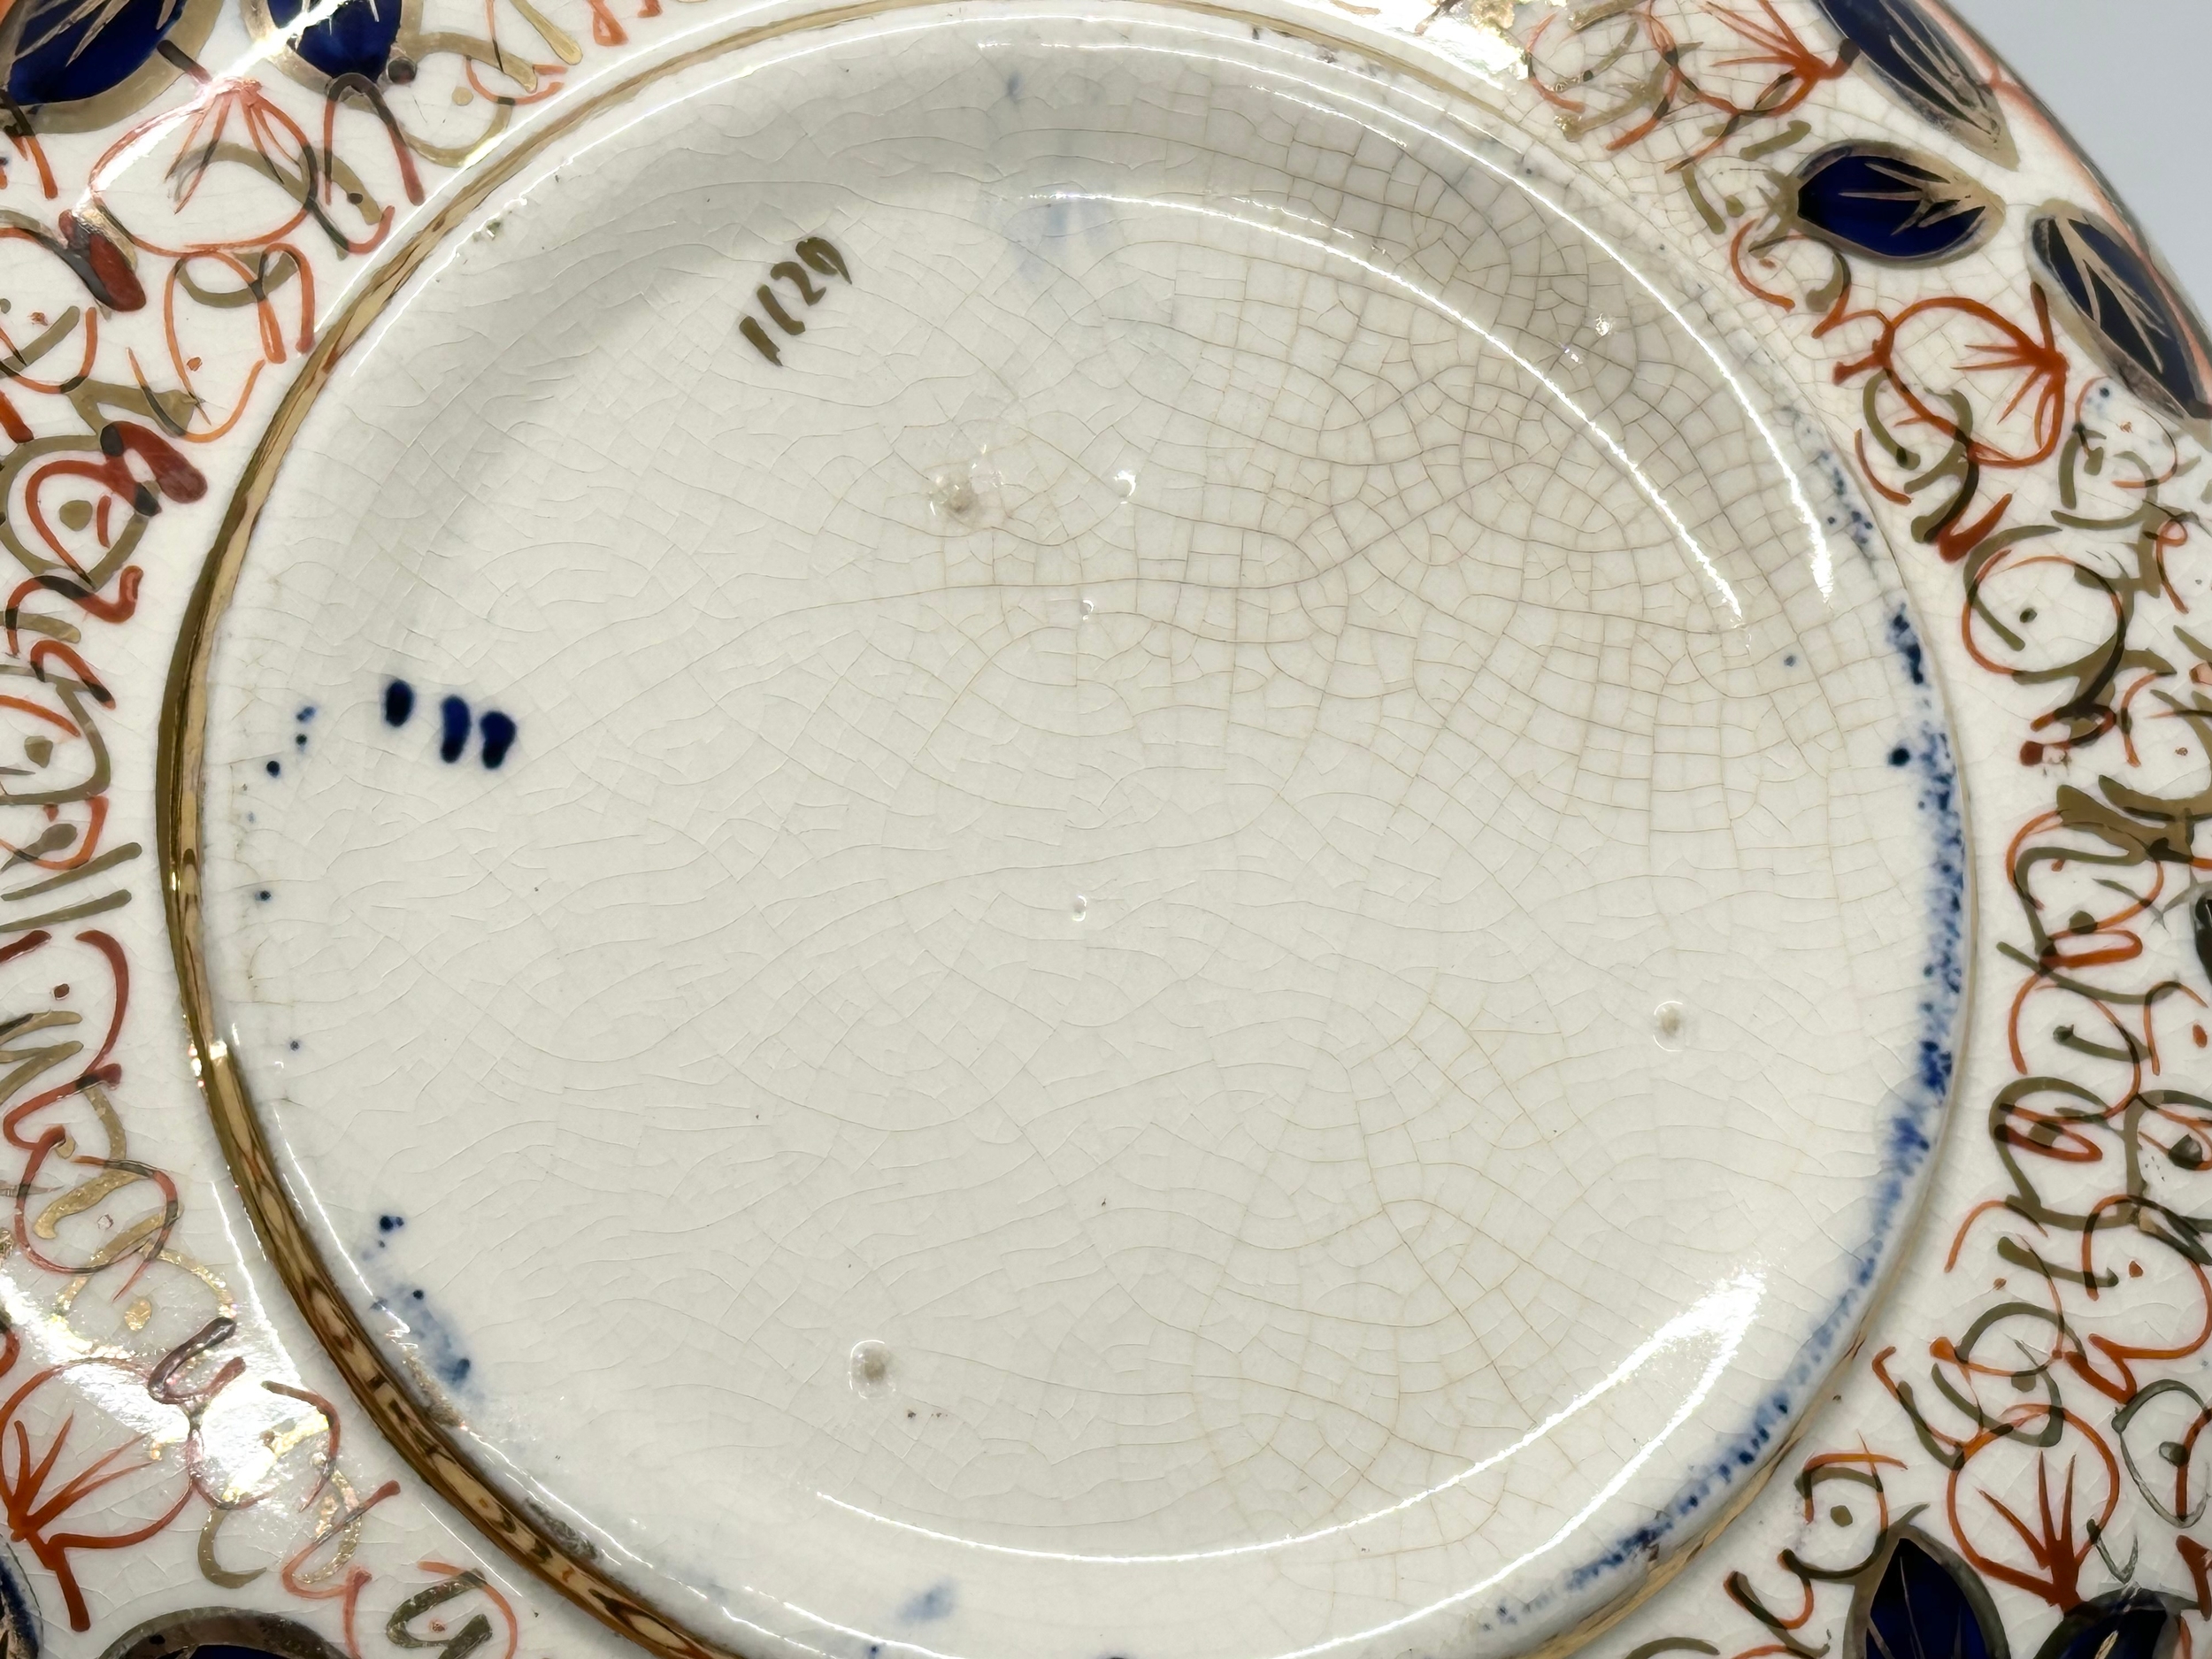 3 Late 19th/Early 20th Century pottery bowls. Minton, Corona Ware and other. 23x9cm - Image 7 of 7